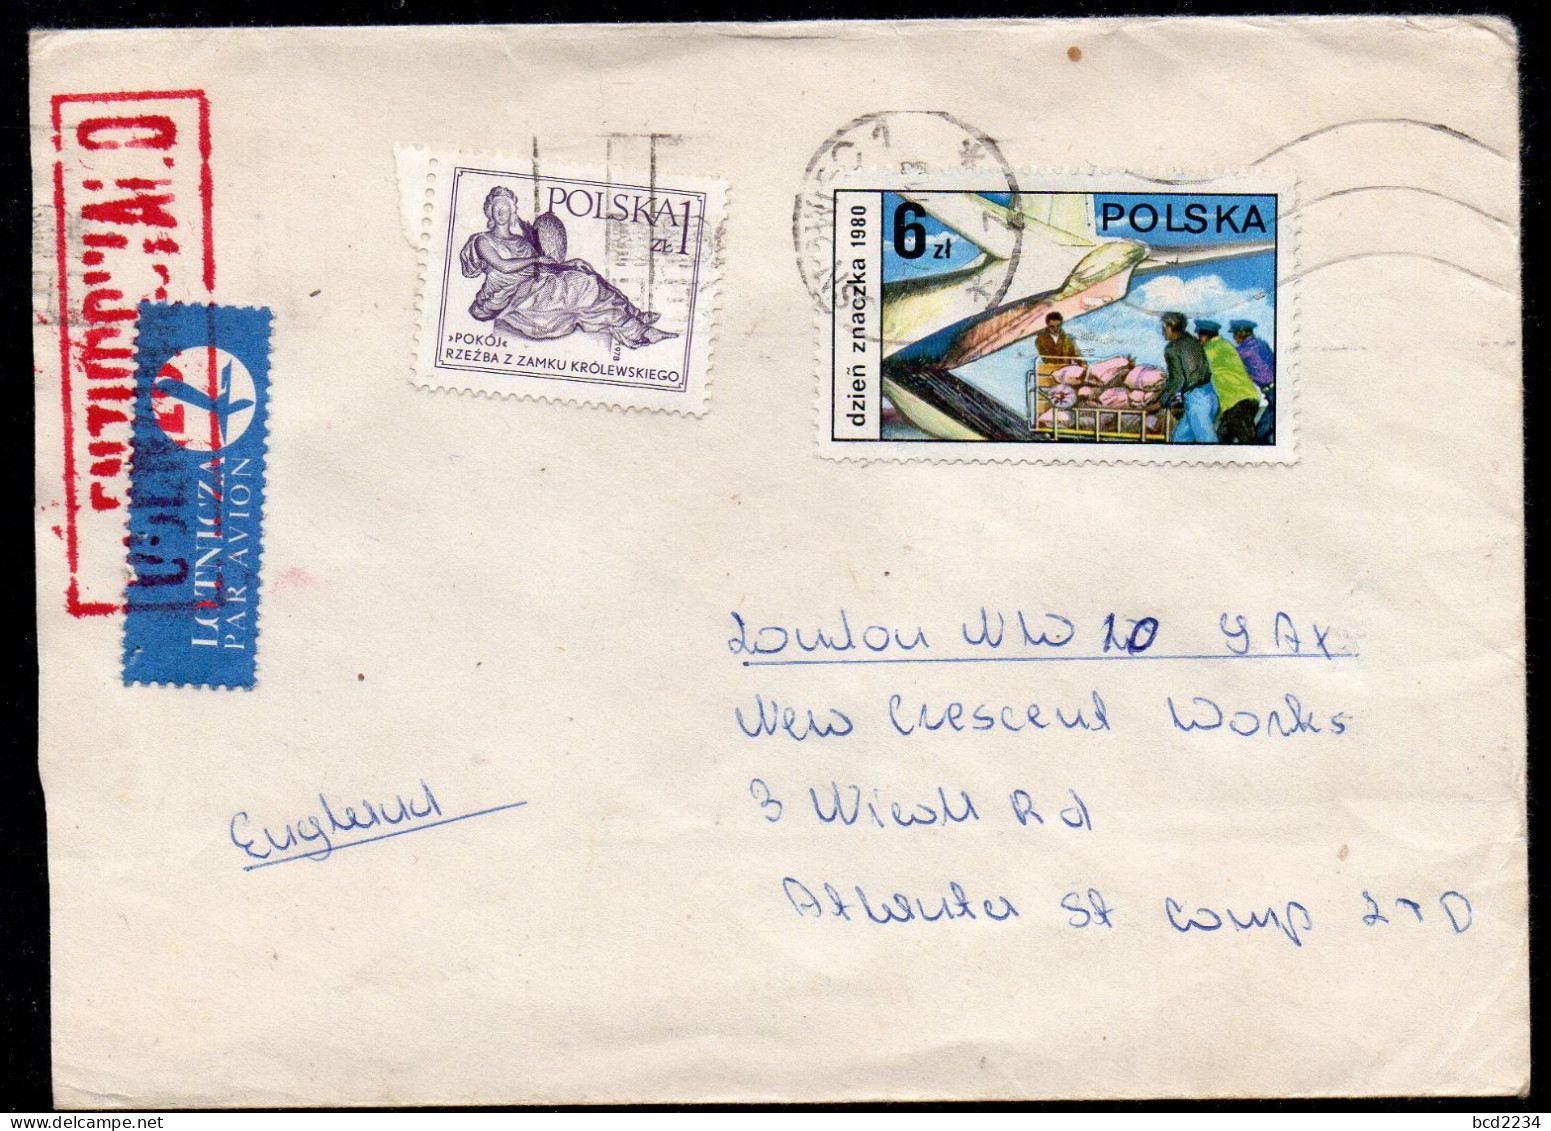 POLAND 1981 SOLIDARITY SOLIDARNOSC PERIOD MARTIAL LAW OCENZUROWANO CENSORED RED CACHET WITH NO NUMBER SOSNOWIEC TO UK - Storia Postale